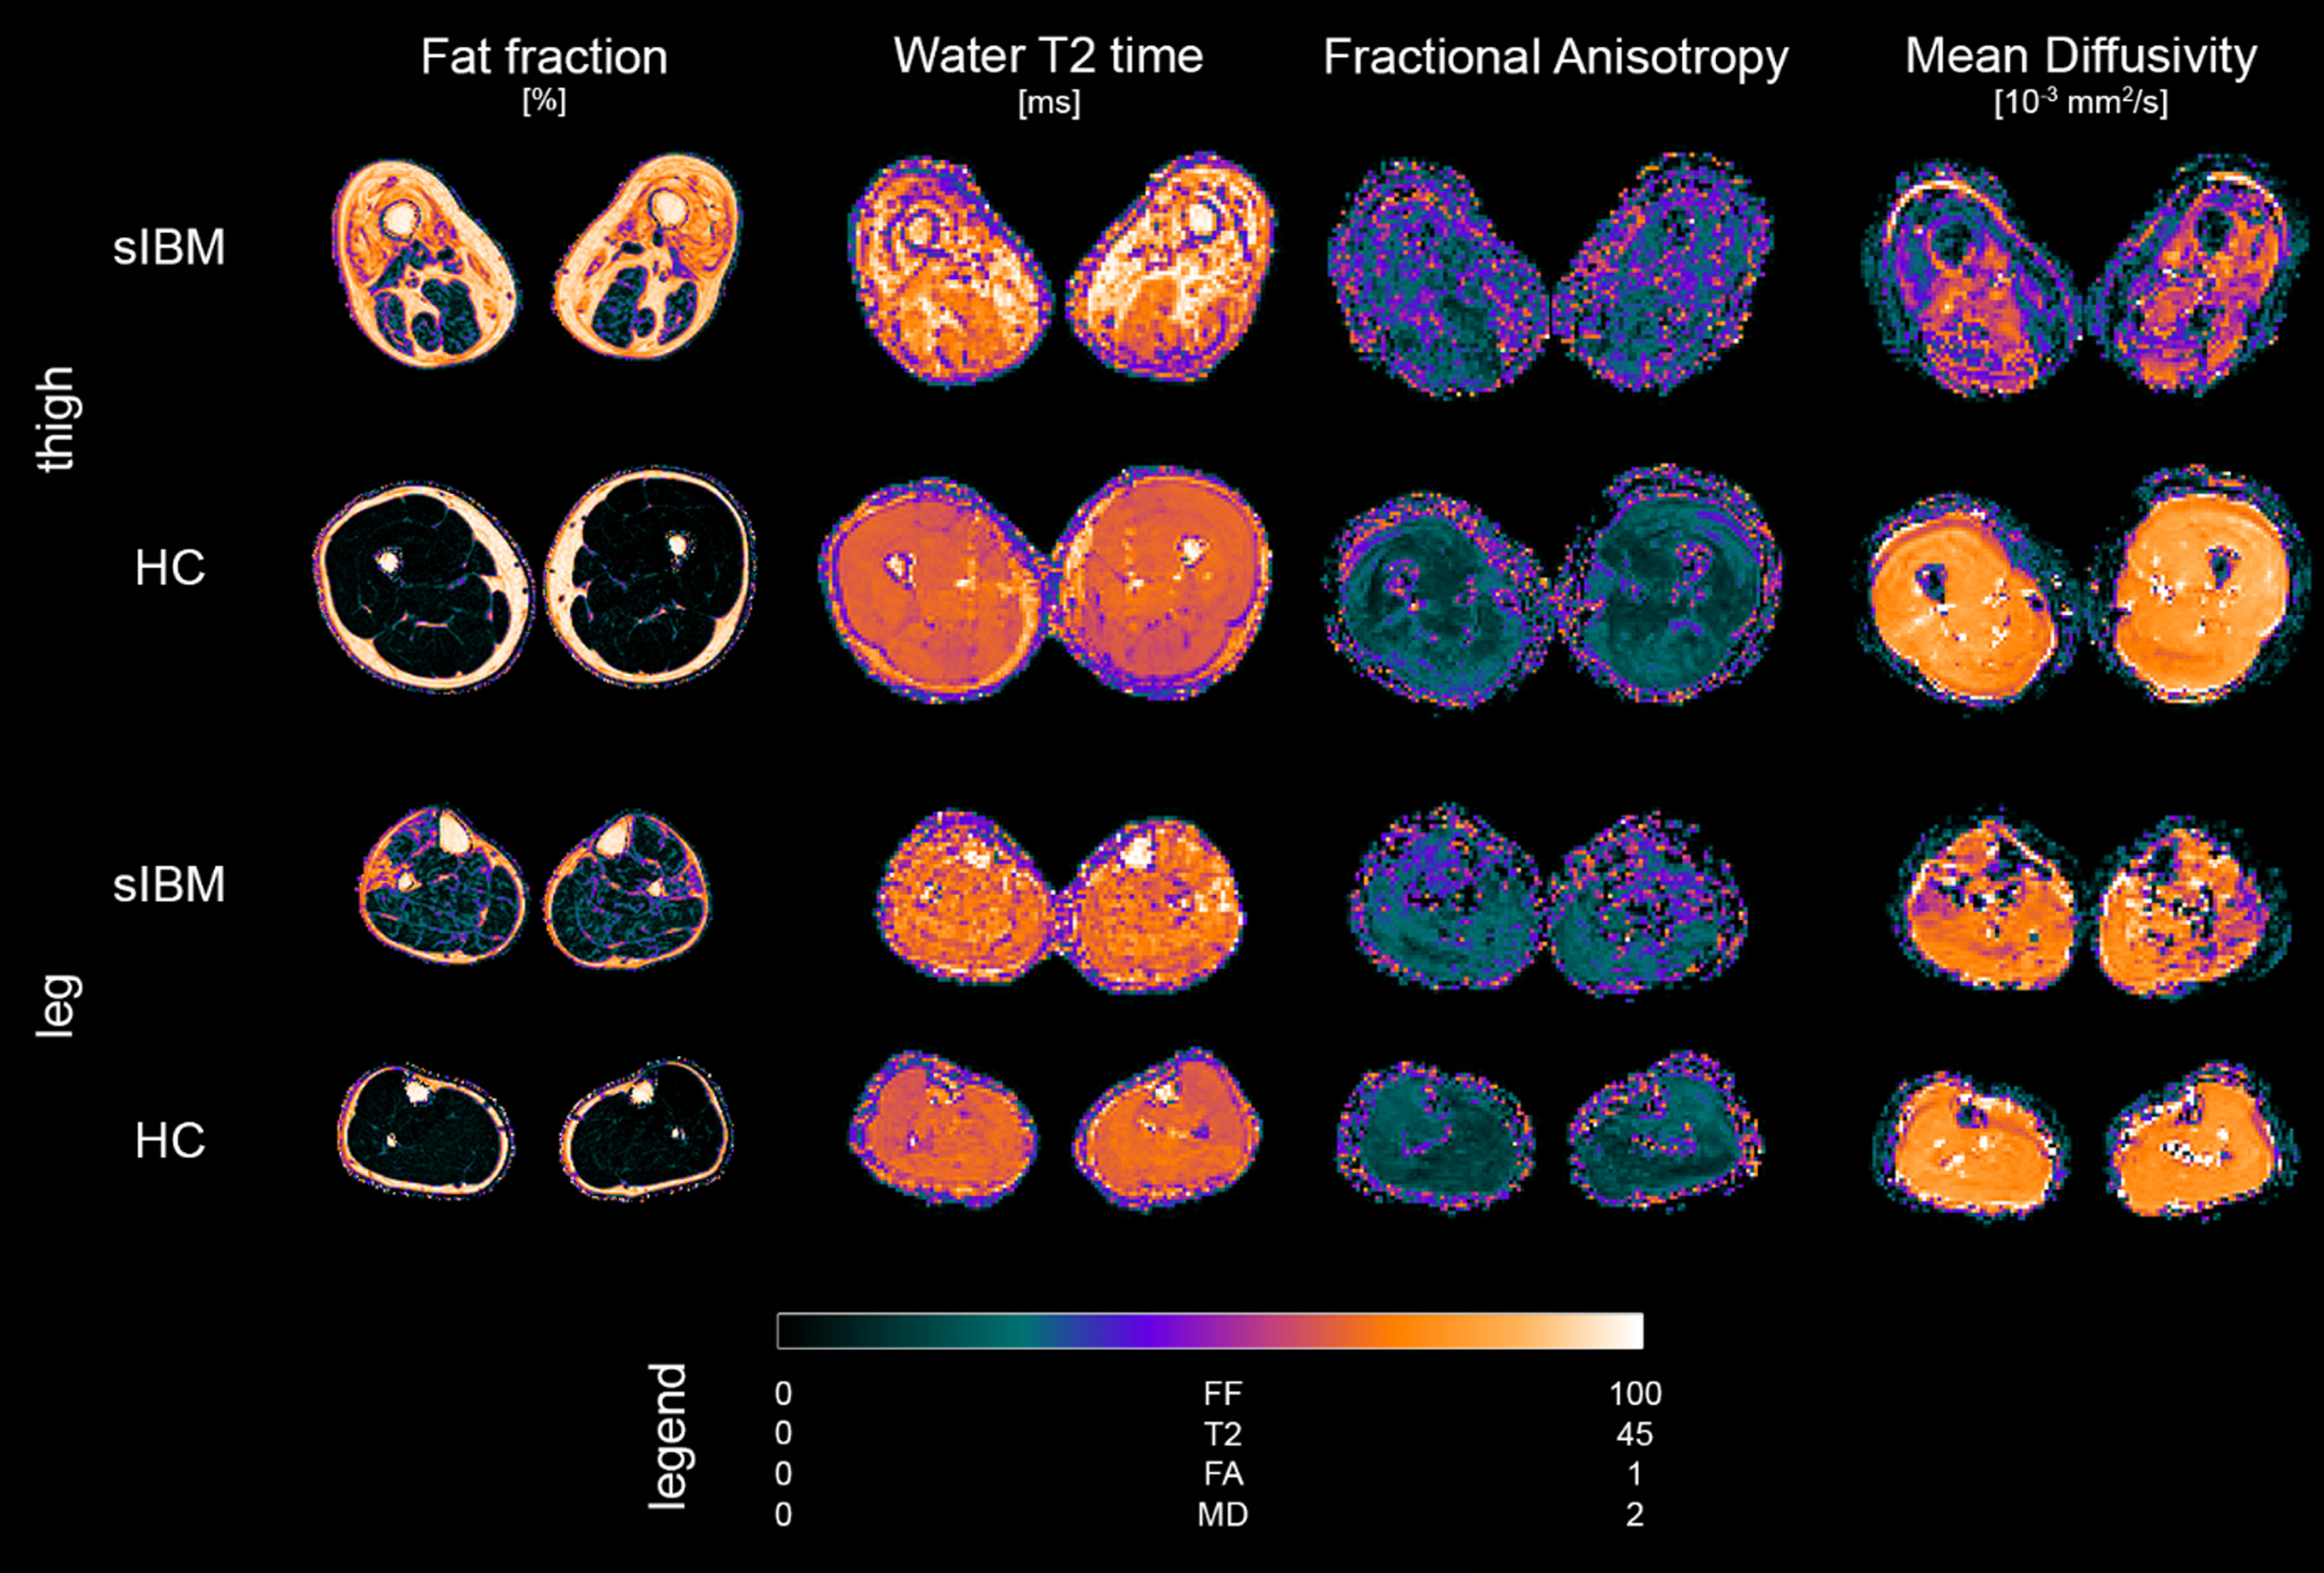 Overview of parameter maps for fat fraction (FF), water T2 relaxation time (T2), fractional anisotropy (FA), and mean diffusivity (MD) of representative sporadic inclusion body myositis patient (sIBM) and healthy control (HC).